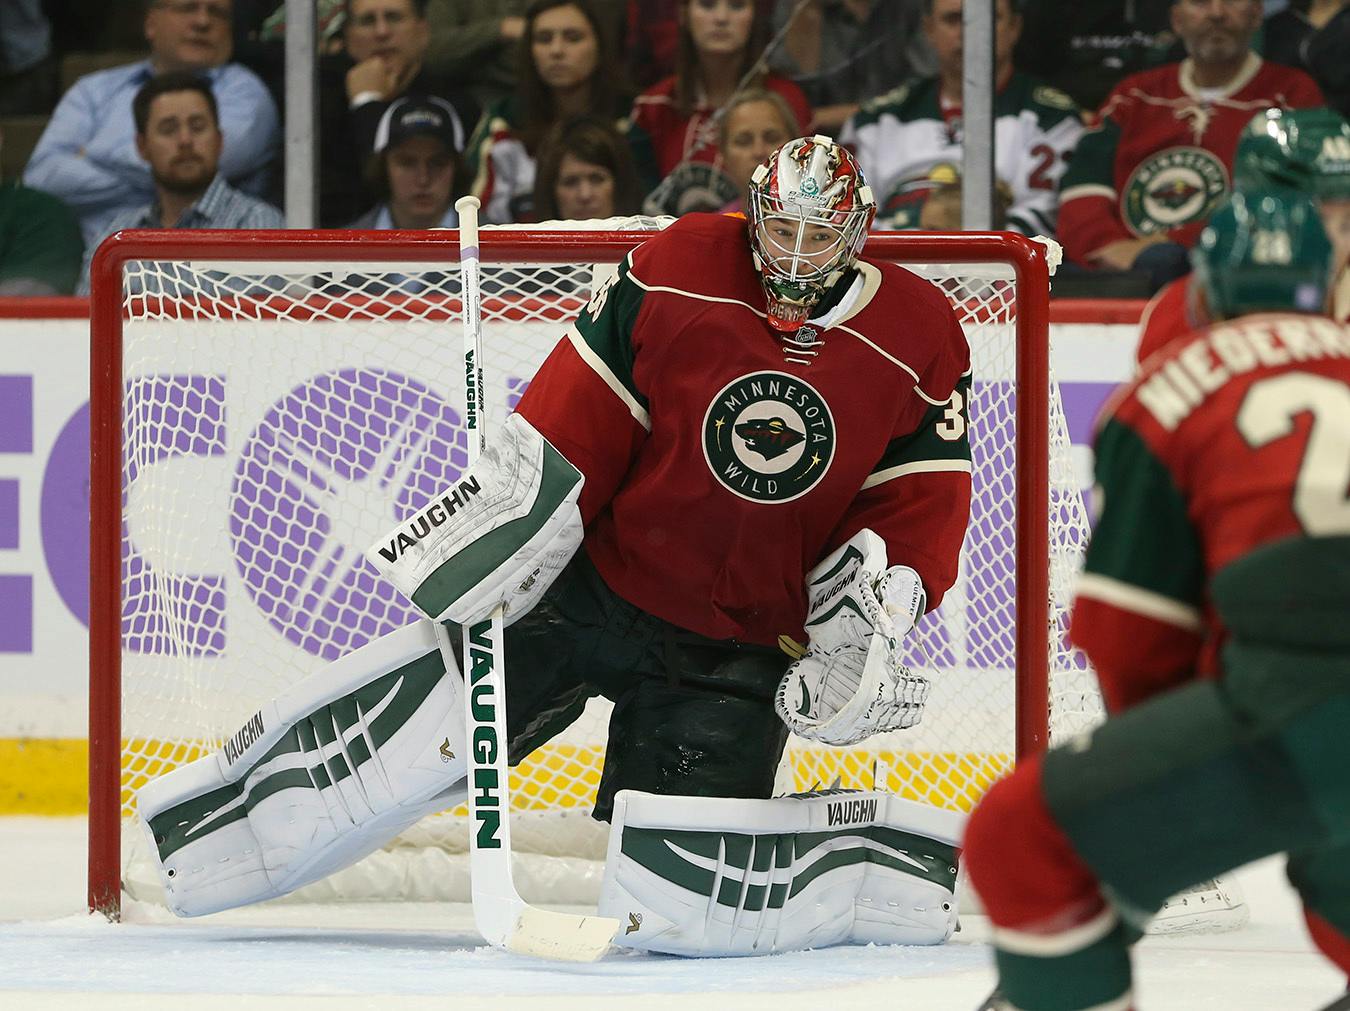 Darcy Kuemper made 26 saves for his third shutout of the season to lead Minnesota past Arizona. Charlie Coyle and Jason Pominville scored for the Wild.